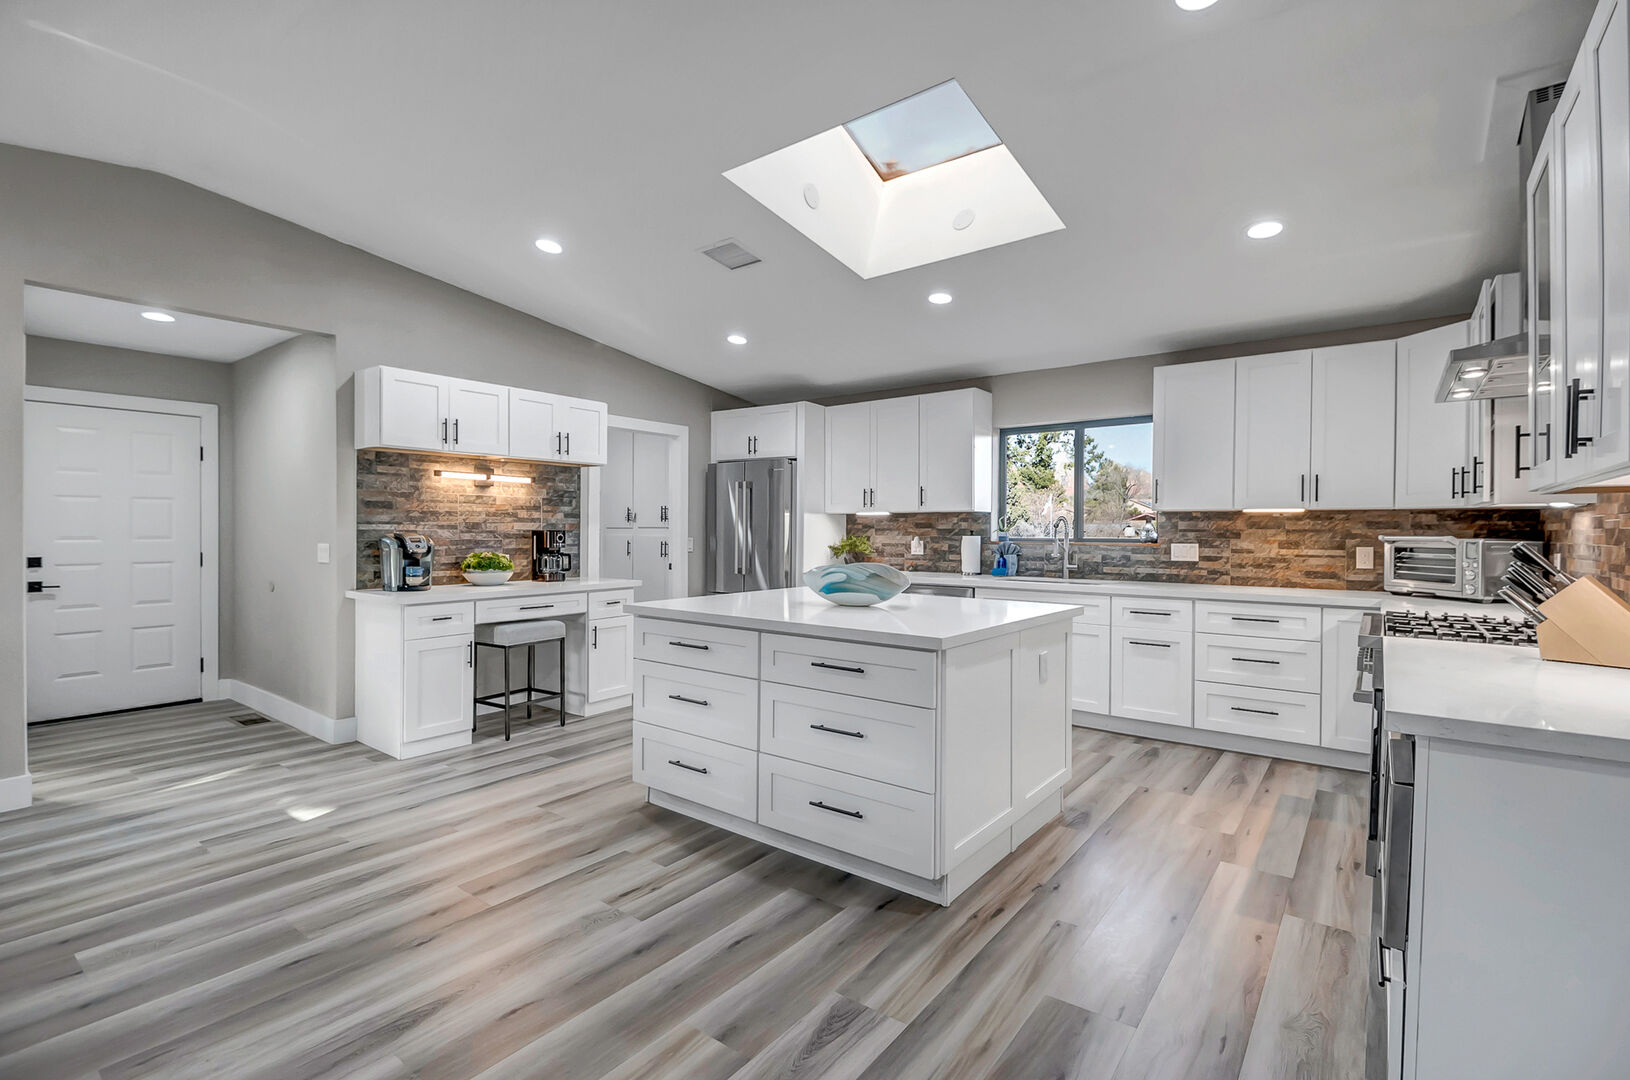 Completely remodeled kitchen with high-end stainless steel appliances, including a 6-burner gas stove, and large kitchen island